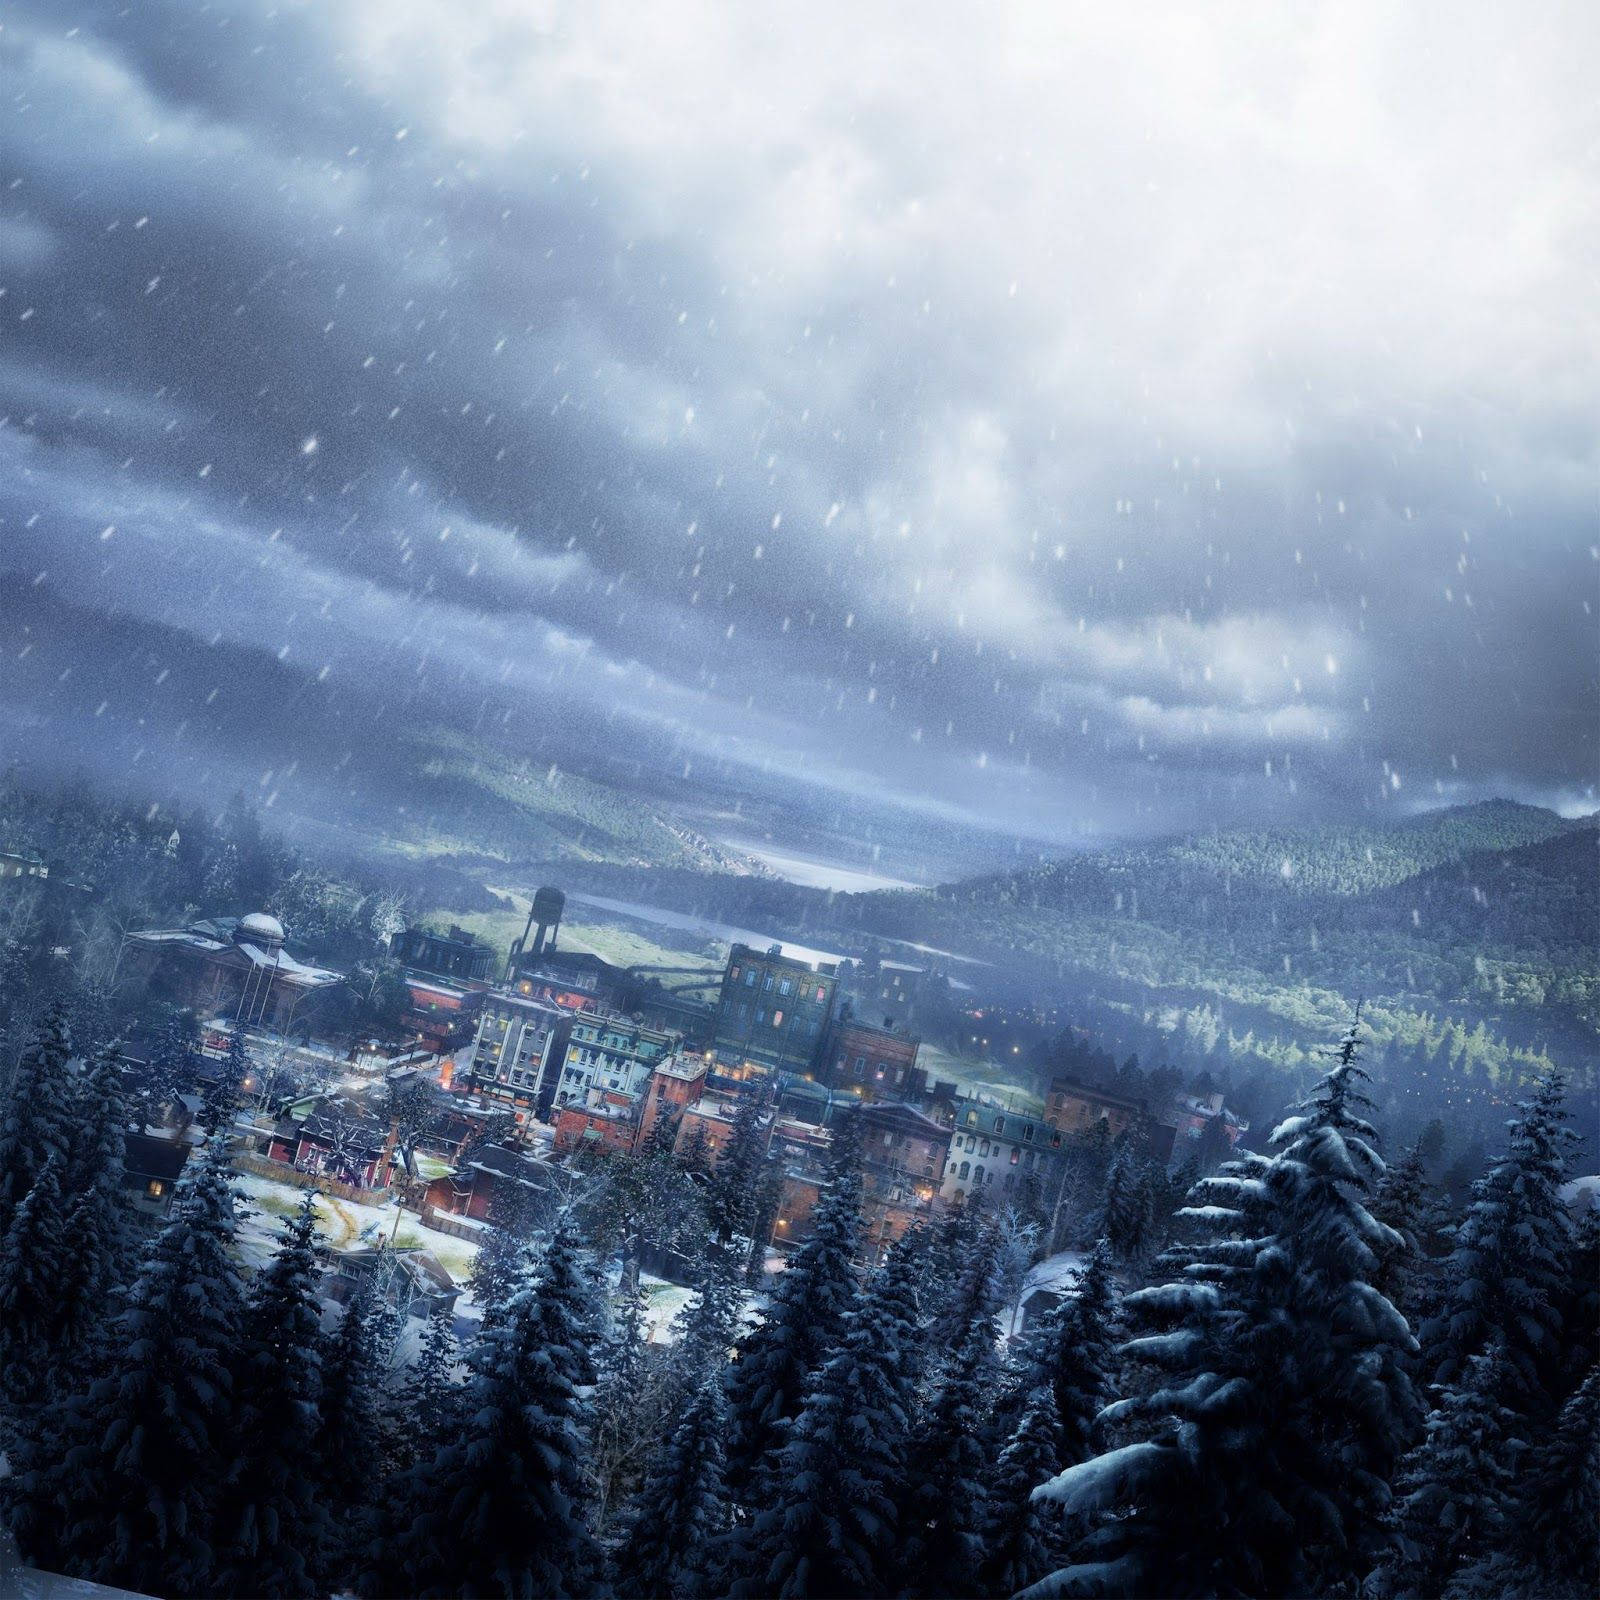 a snowy scene with a city and trees Wallpaper